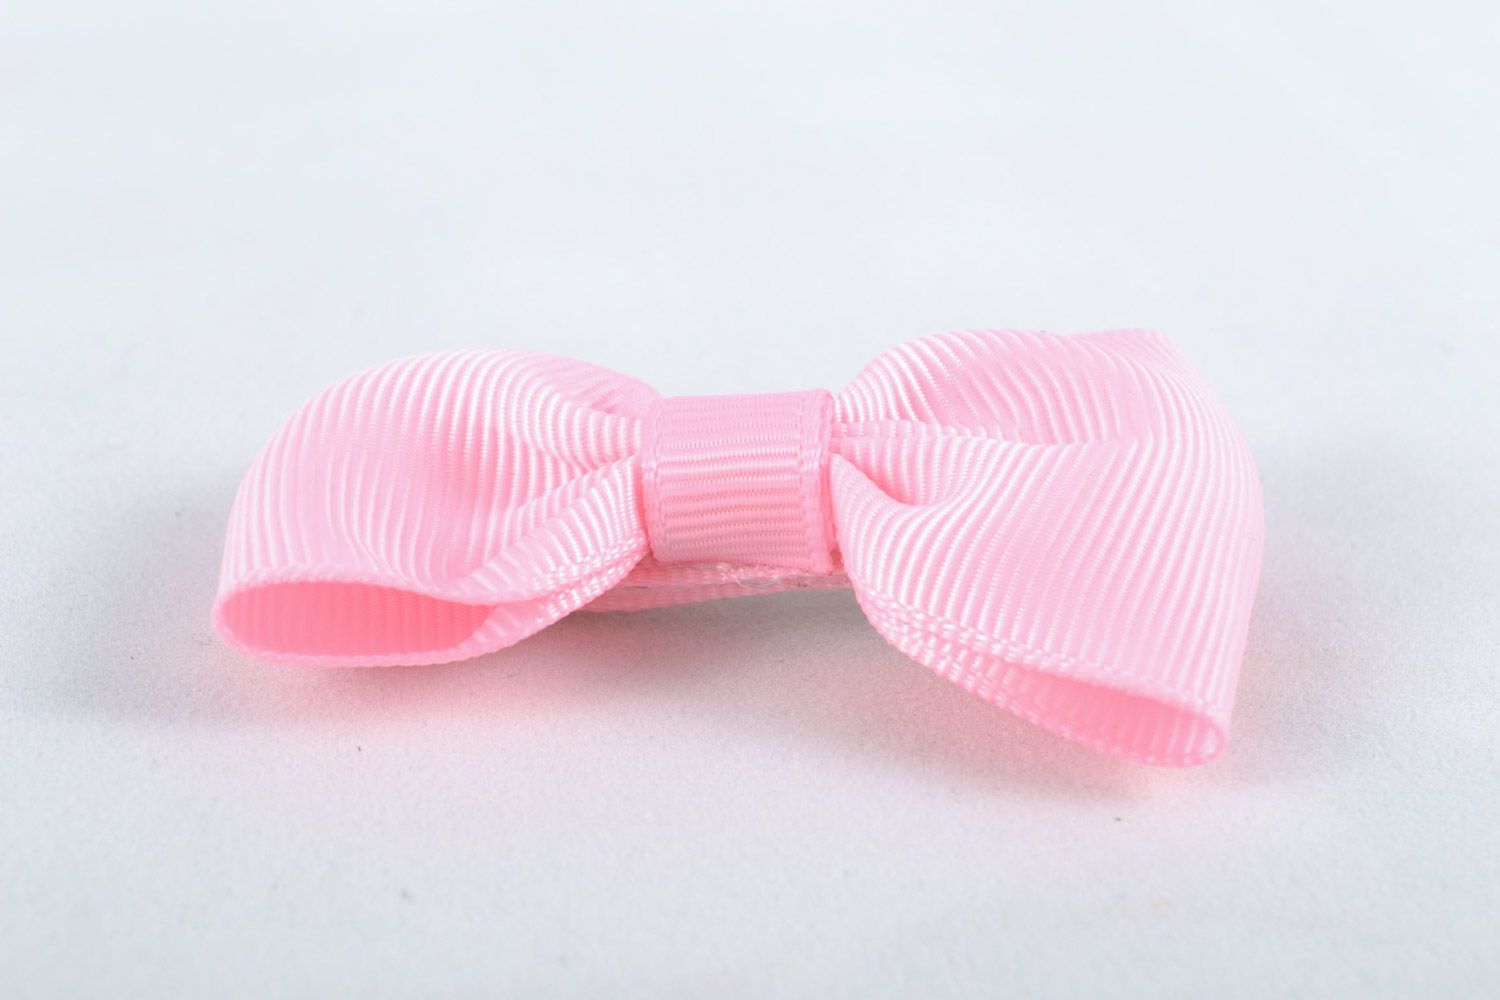 Handmade beautiful pink hairpin in the form of ribbon bow stylish hair accessories photo 4